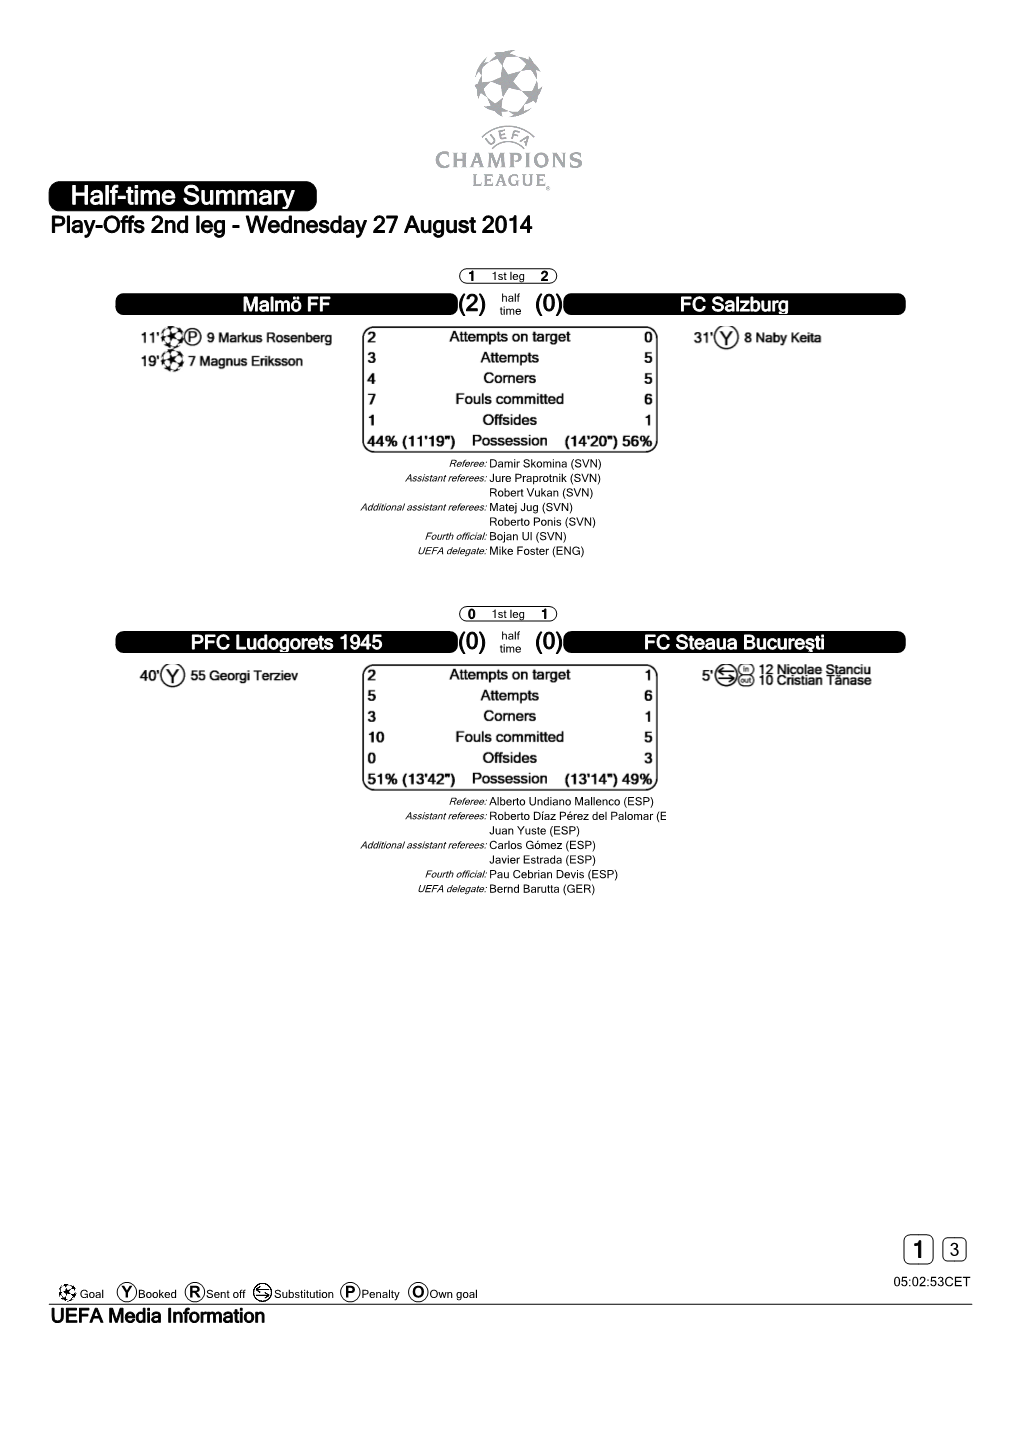 Half-Time Summary Play-Offs 2Nd Leg - Wednesday 27 August 2014